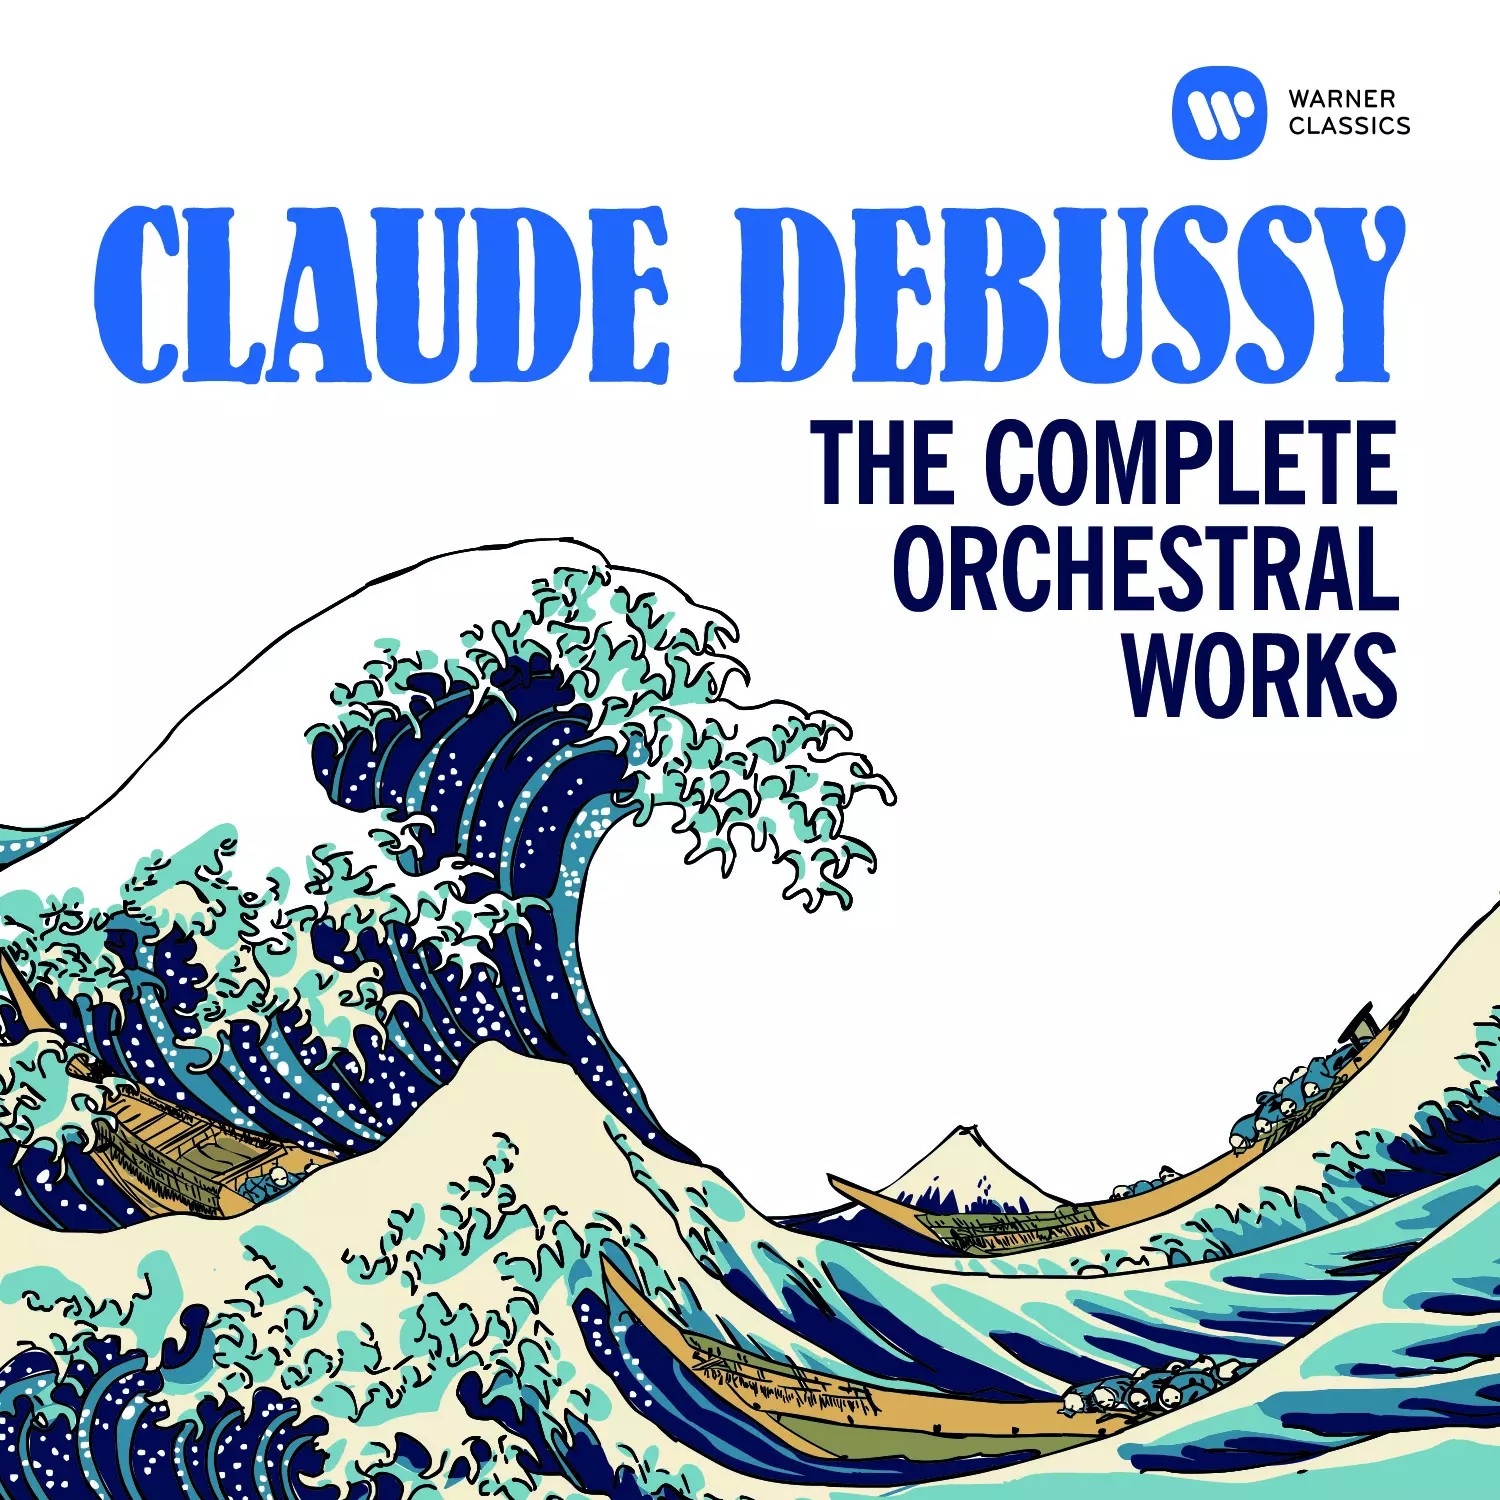 Debussy: The Complete Orchestral Works